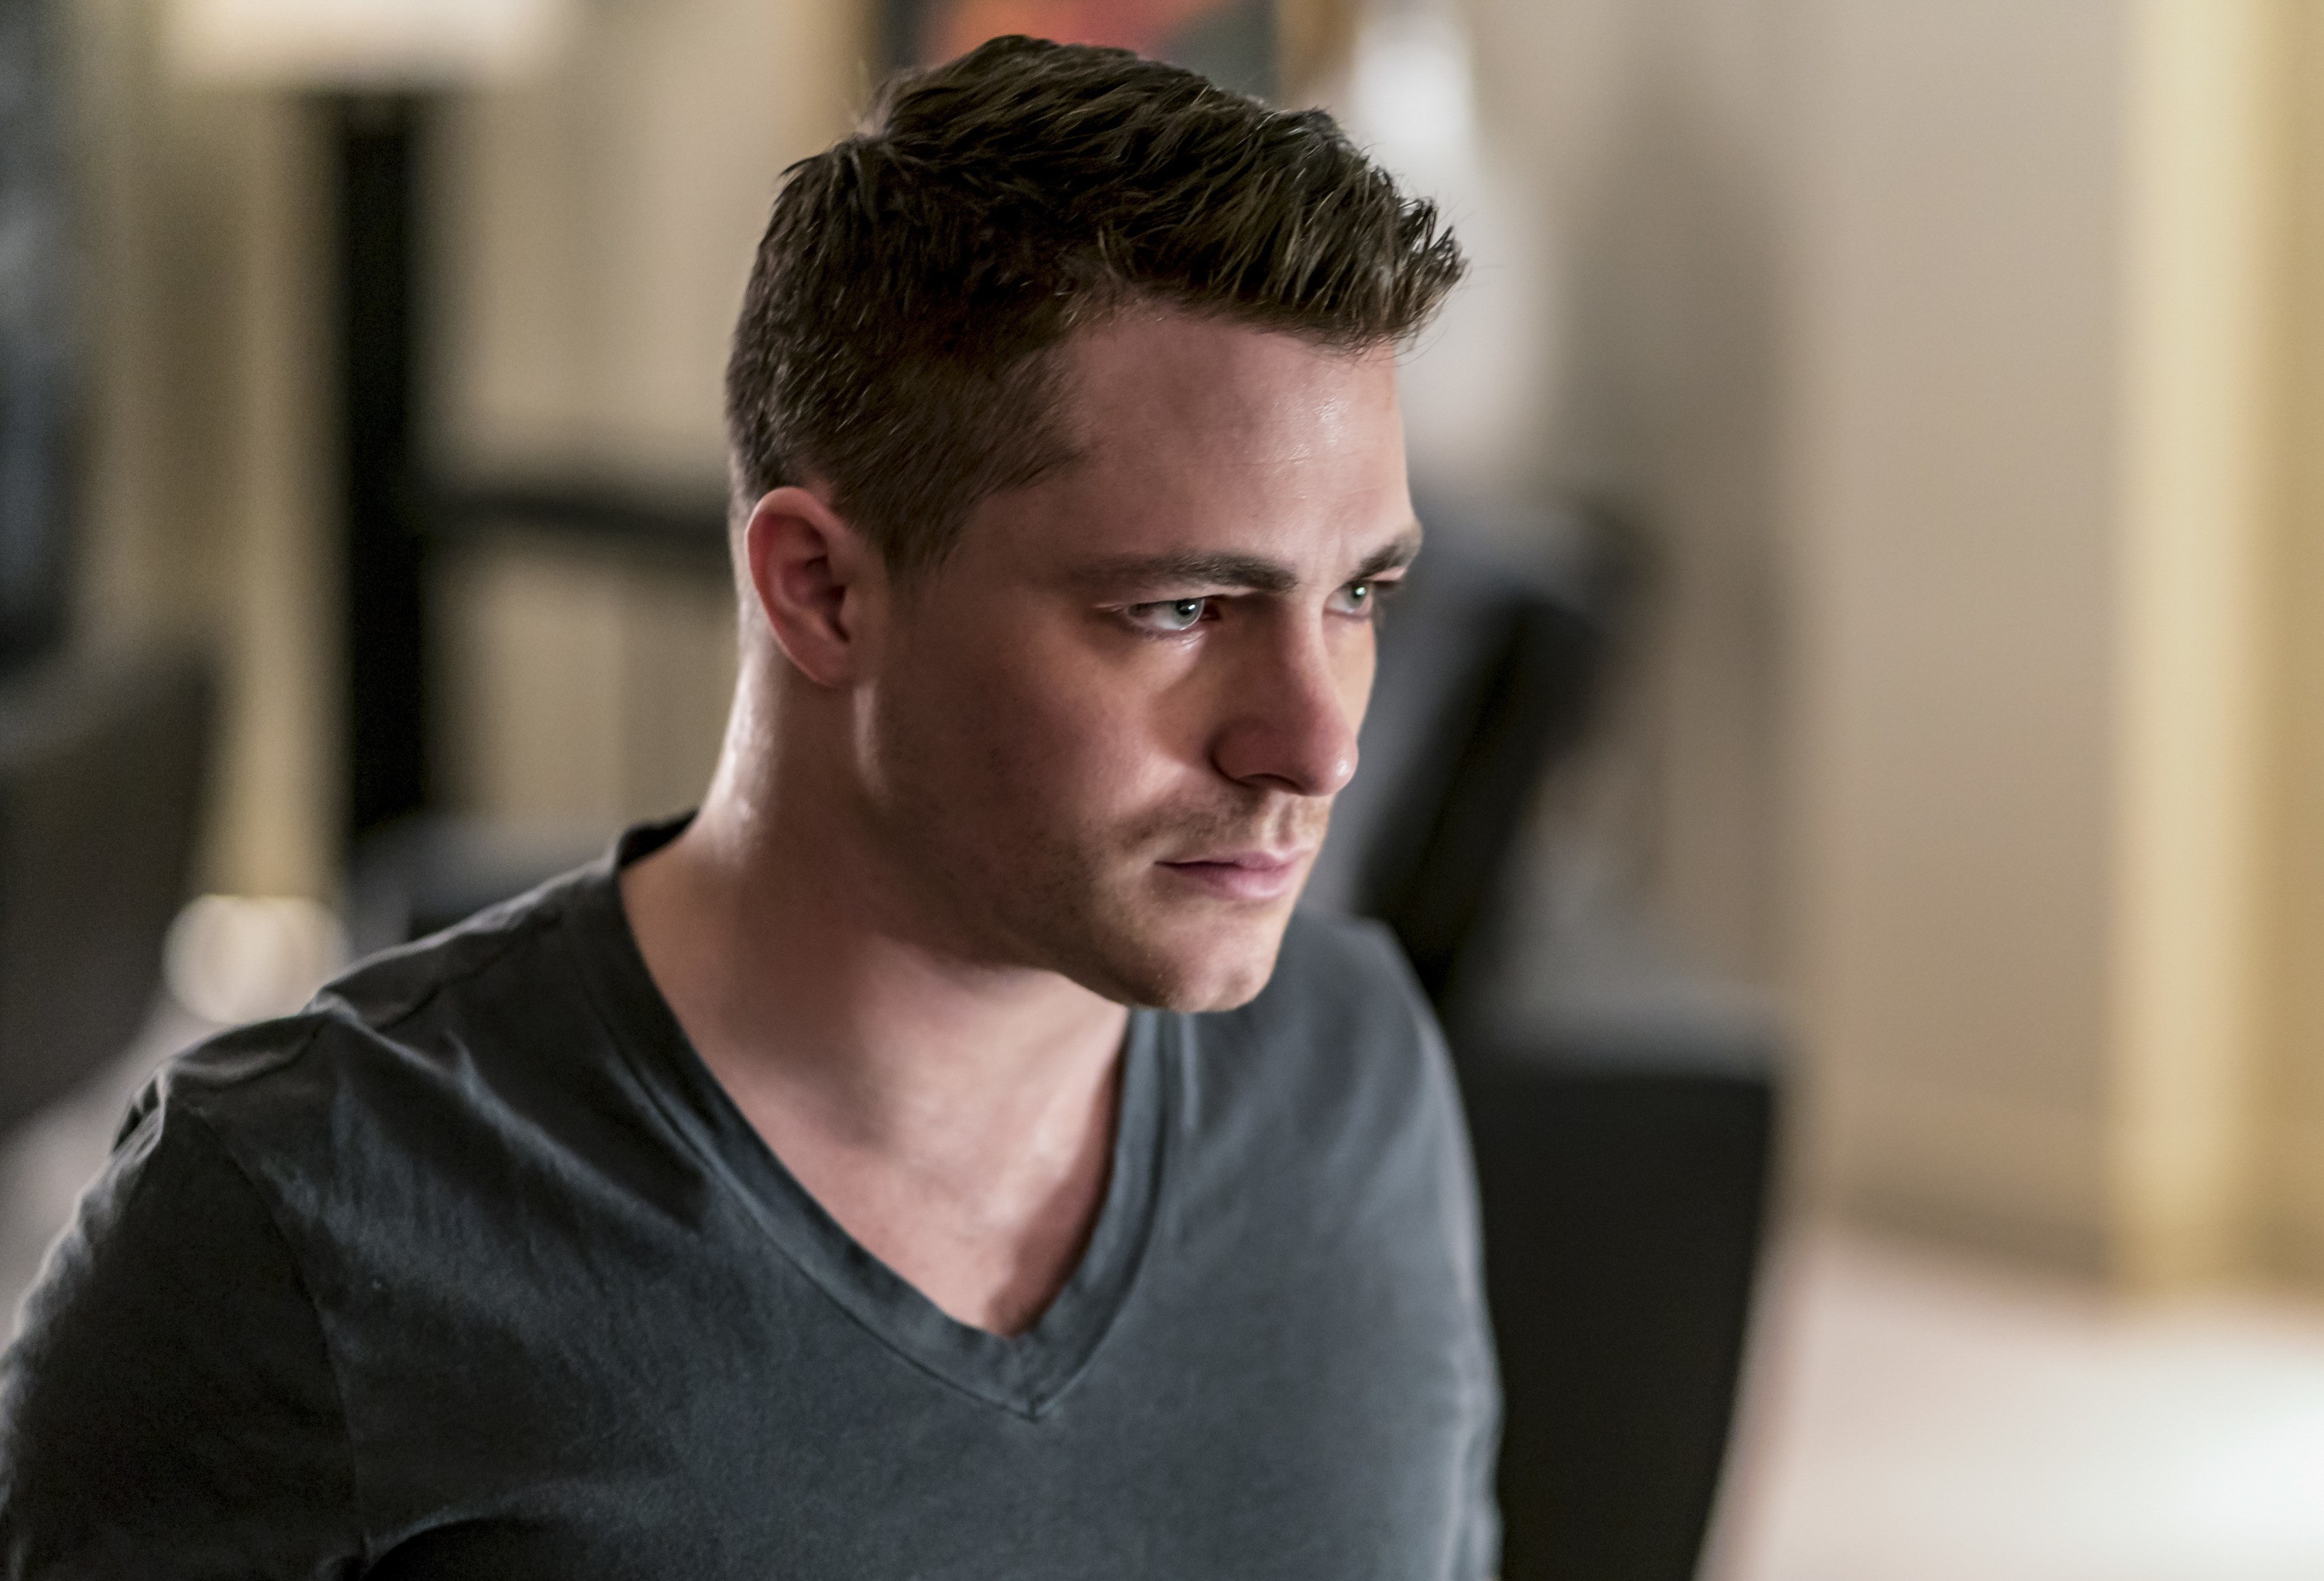 Arrow Speedy Suits Up Again To Save Roy Harper In New Photos From Season 6 Episode 15 8566